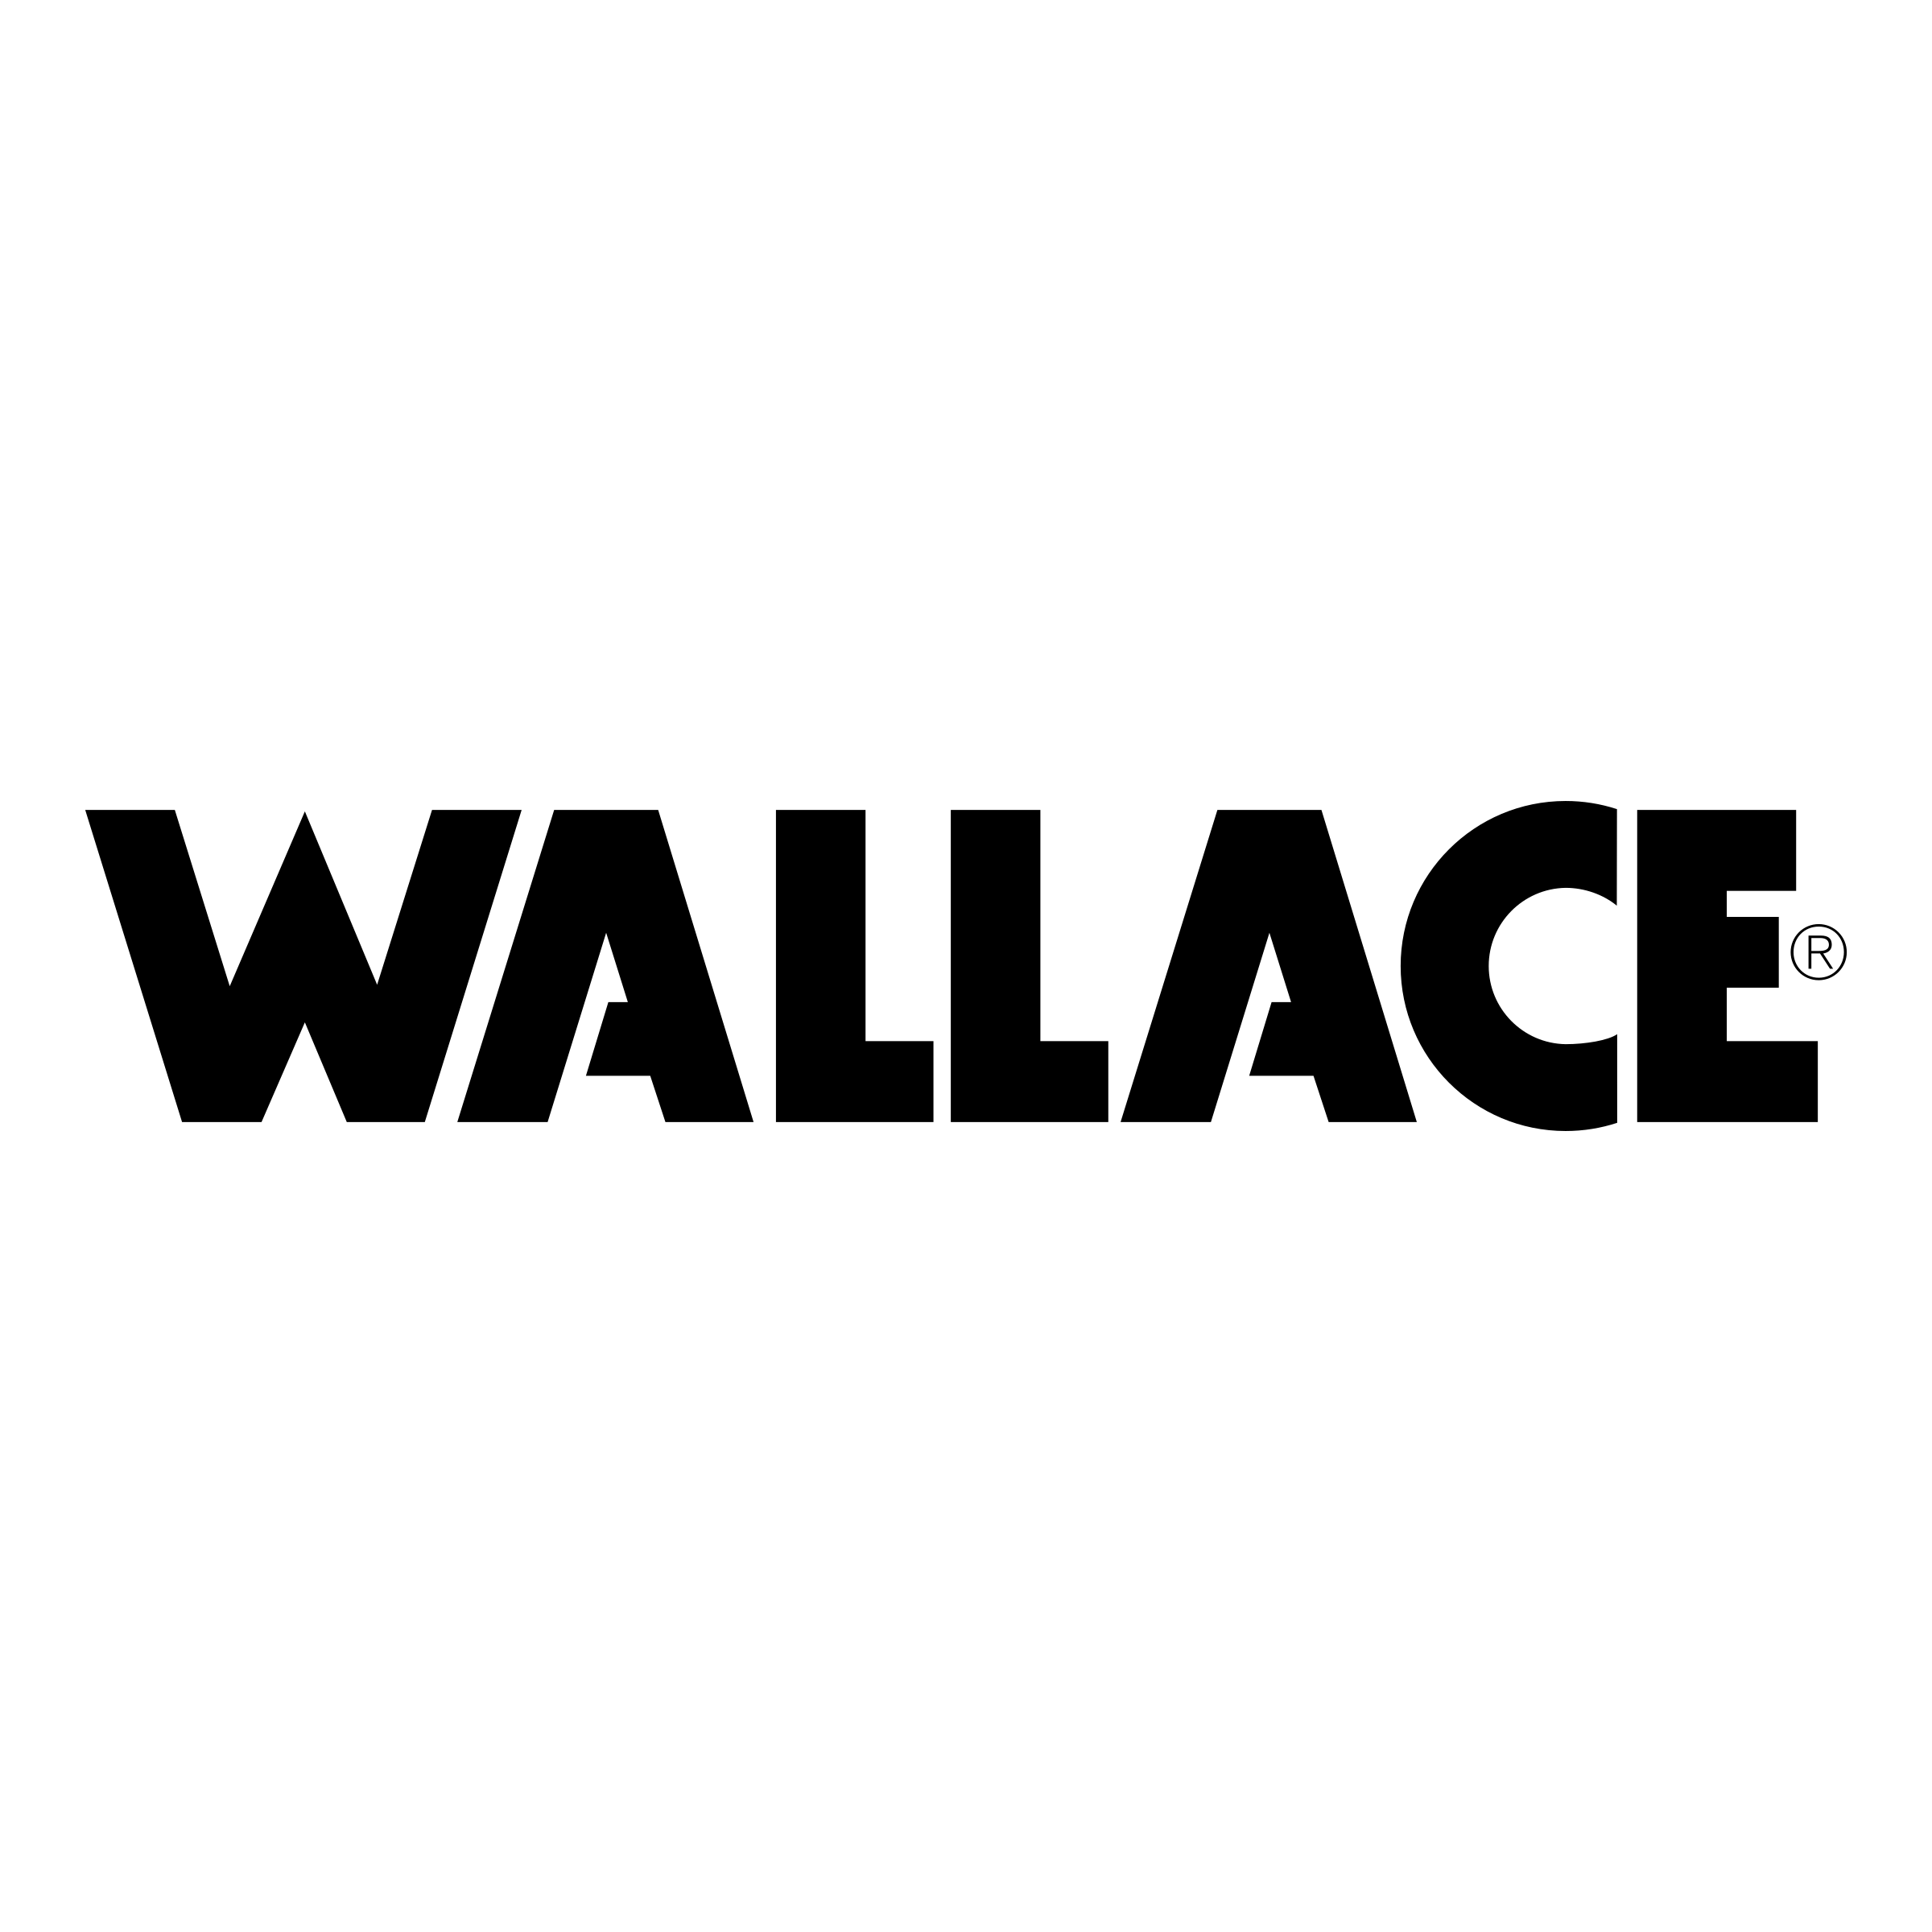 Wallace Logo - Wallace Logo PNG Transparent & SVG Vector - Freebie Supply